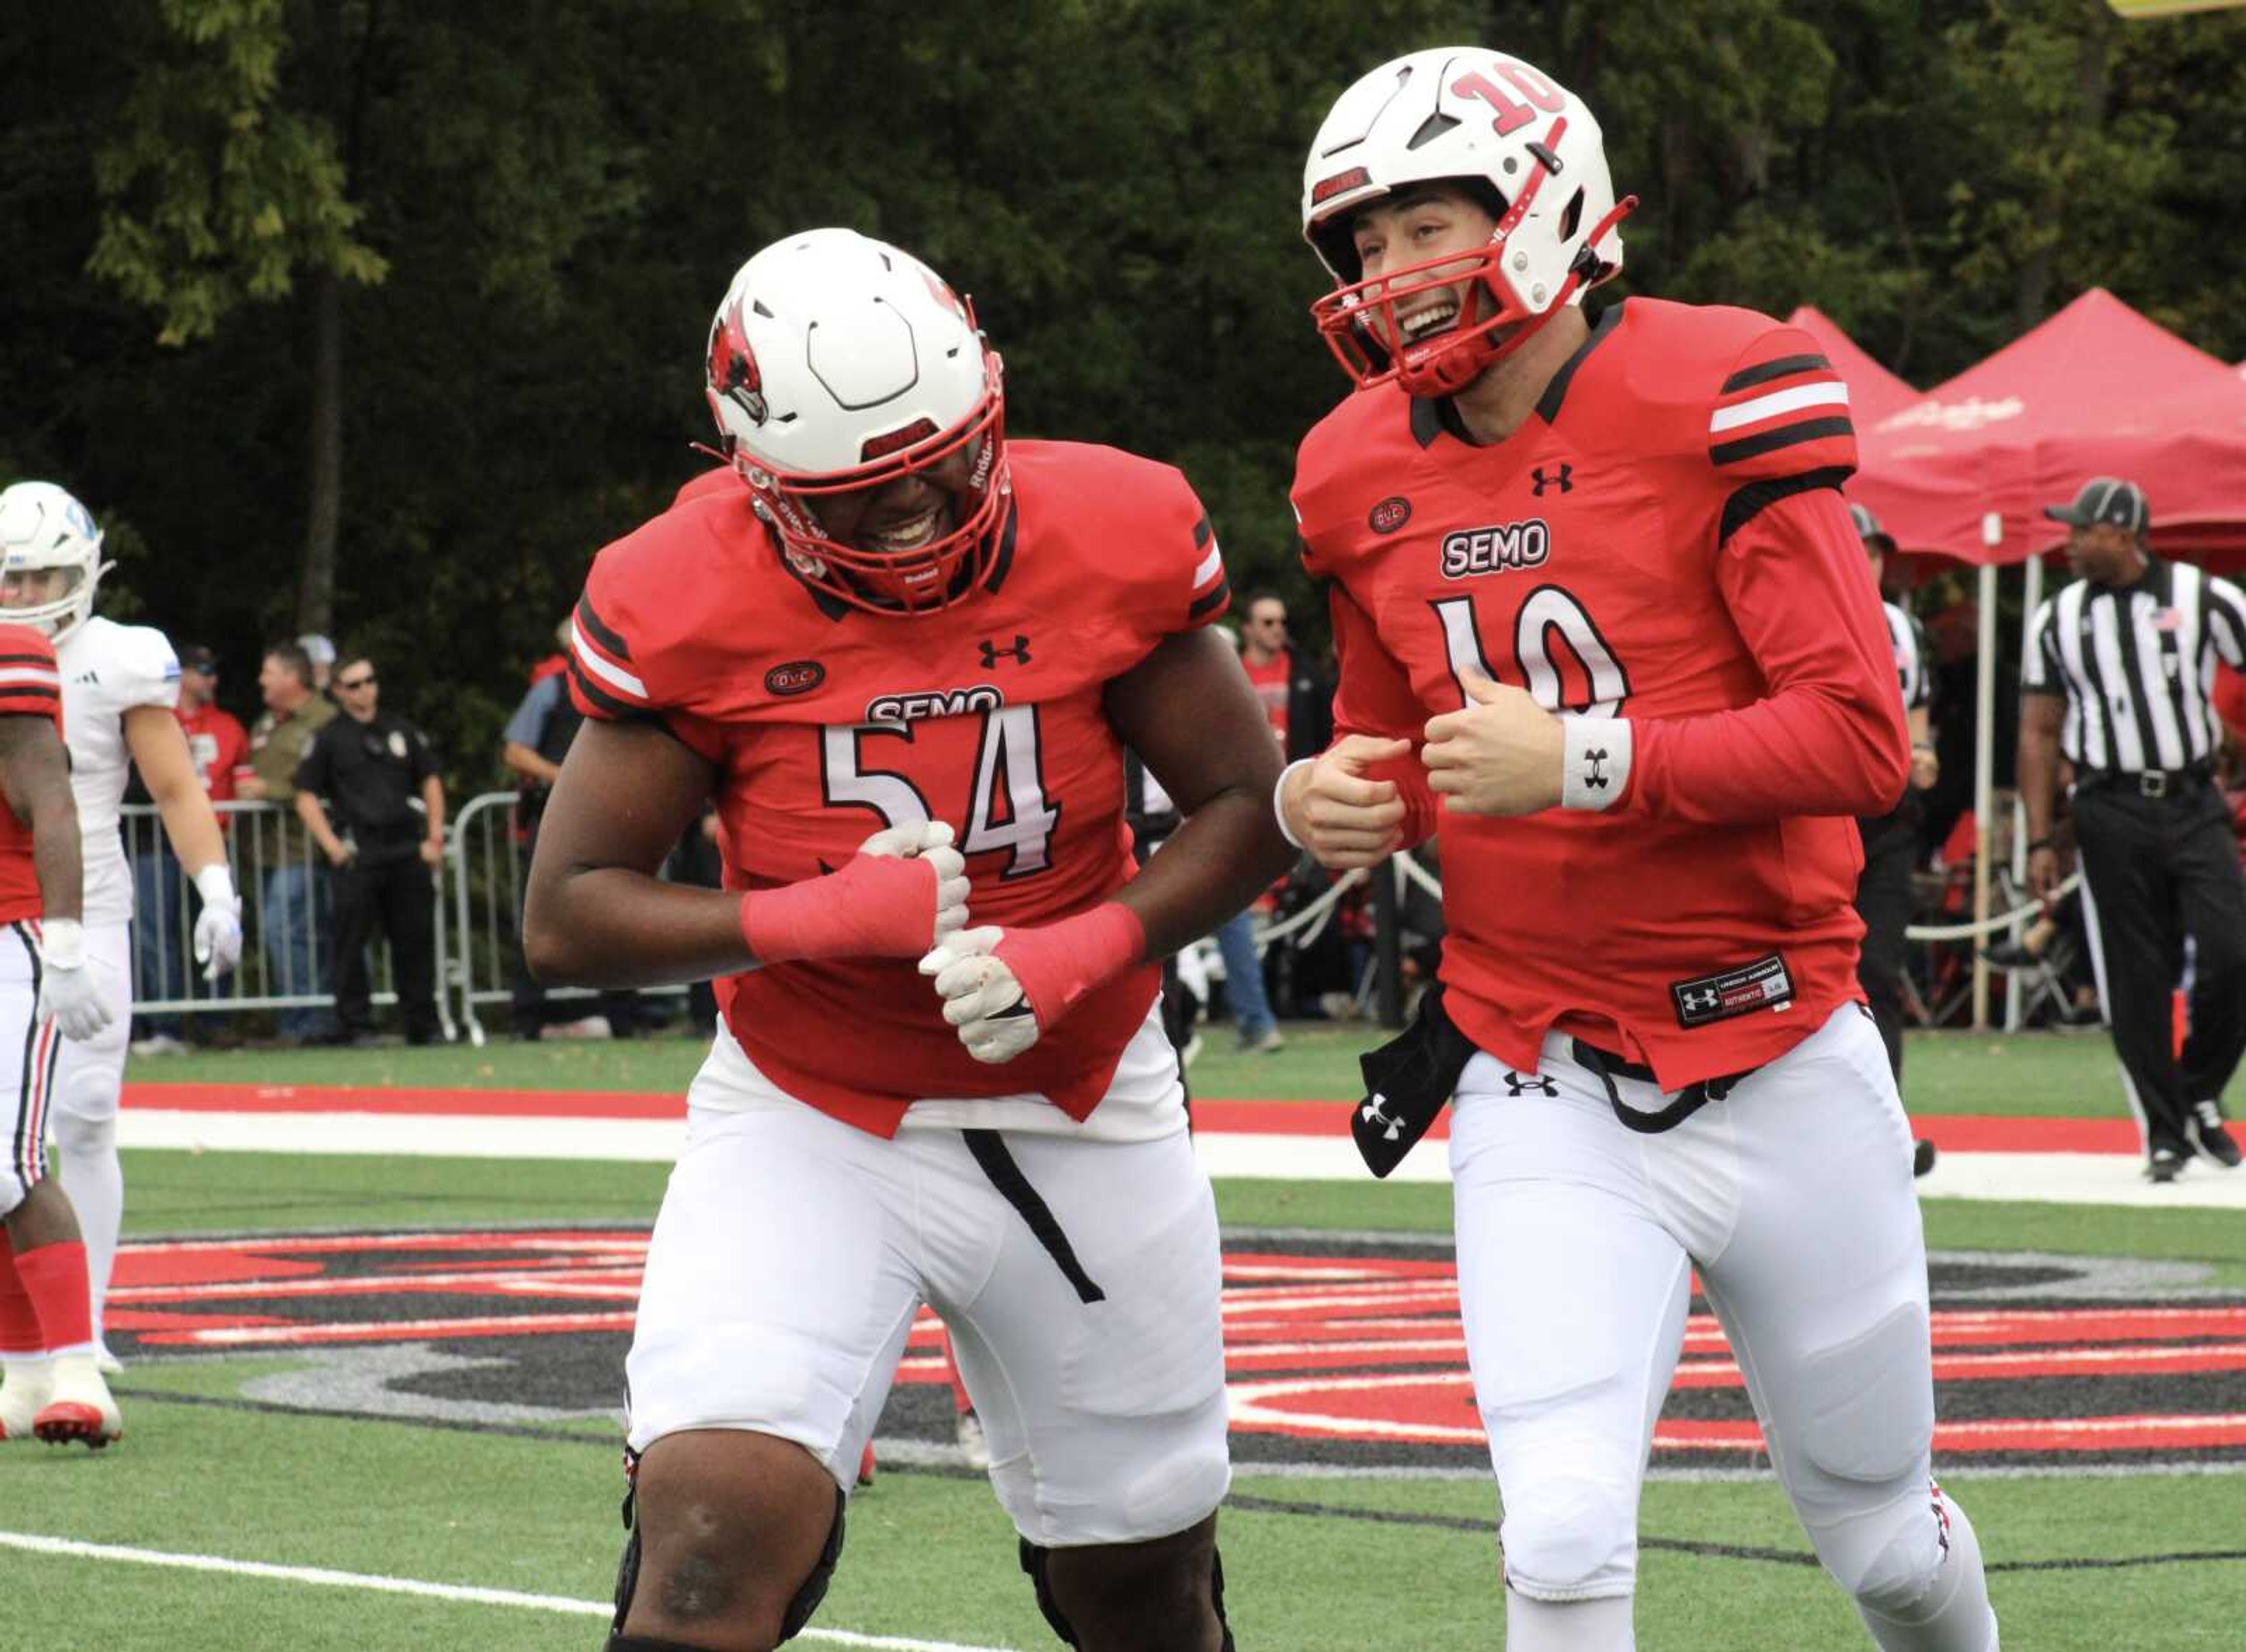 Junior offensive lineman Marshakie Applewhite (54) and junior quarterback Paxton DeLaurent (10) celebrate after DeLaurent scores a touchdown in Saturday’s matchup with EIU. The Redhawks came out on top 35-28.